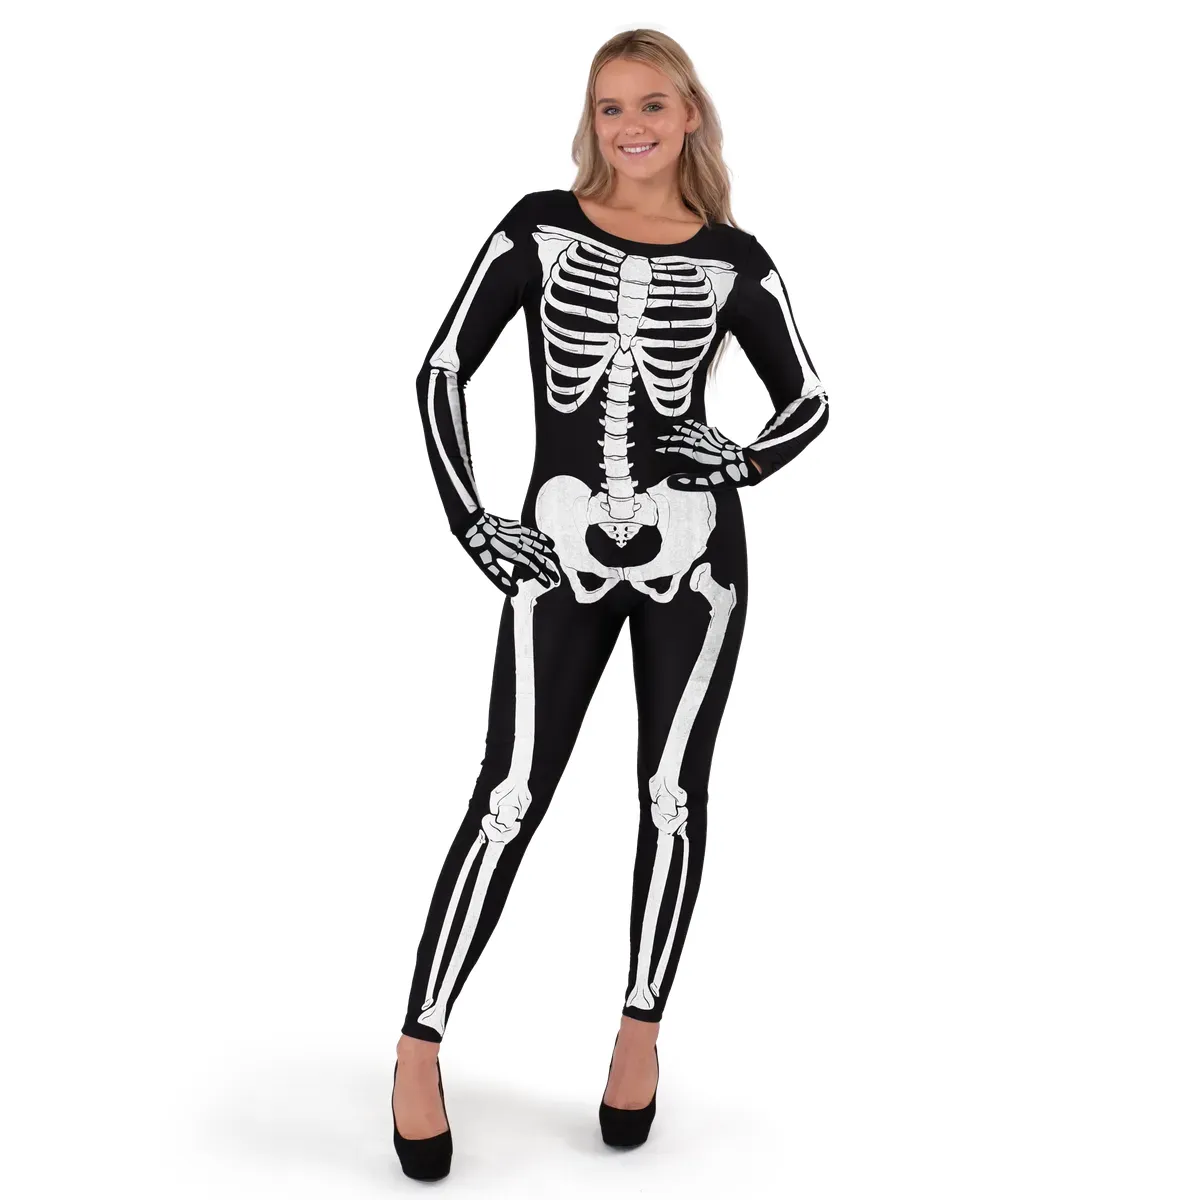 You are currently viewing Why Halloween Pajamas Women Are a Hit？